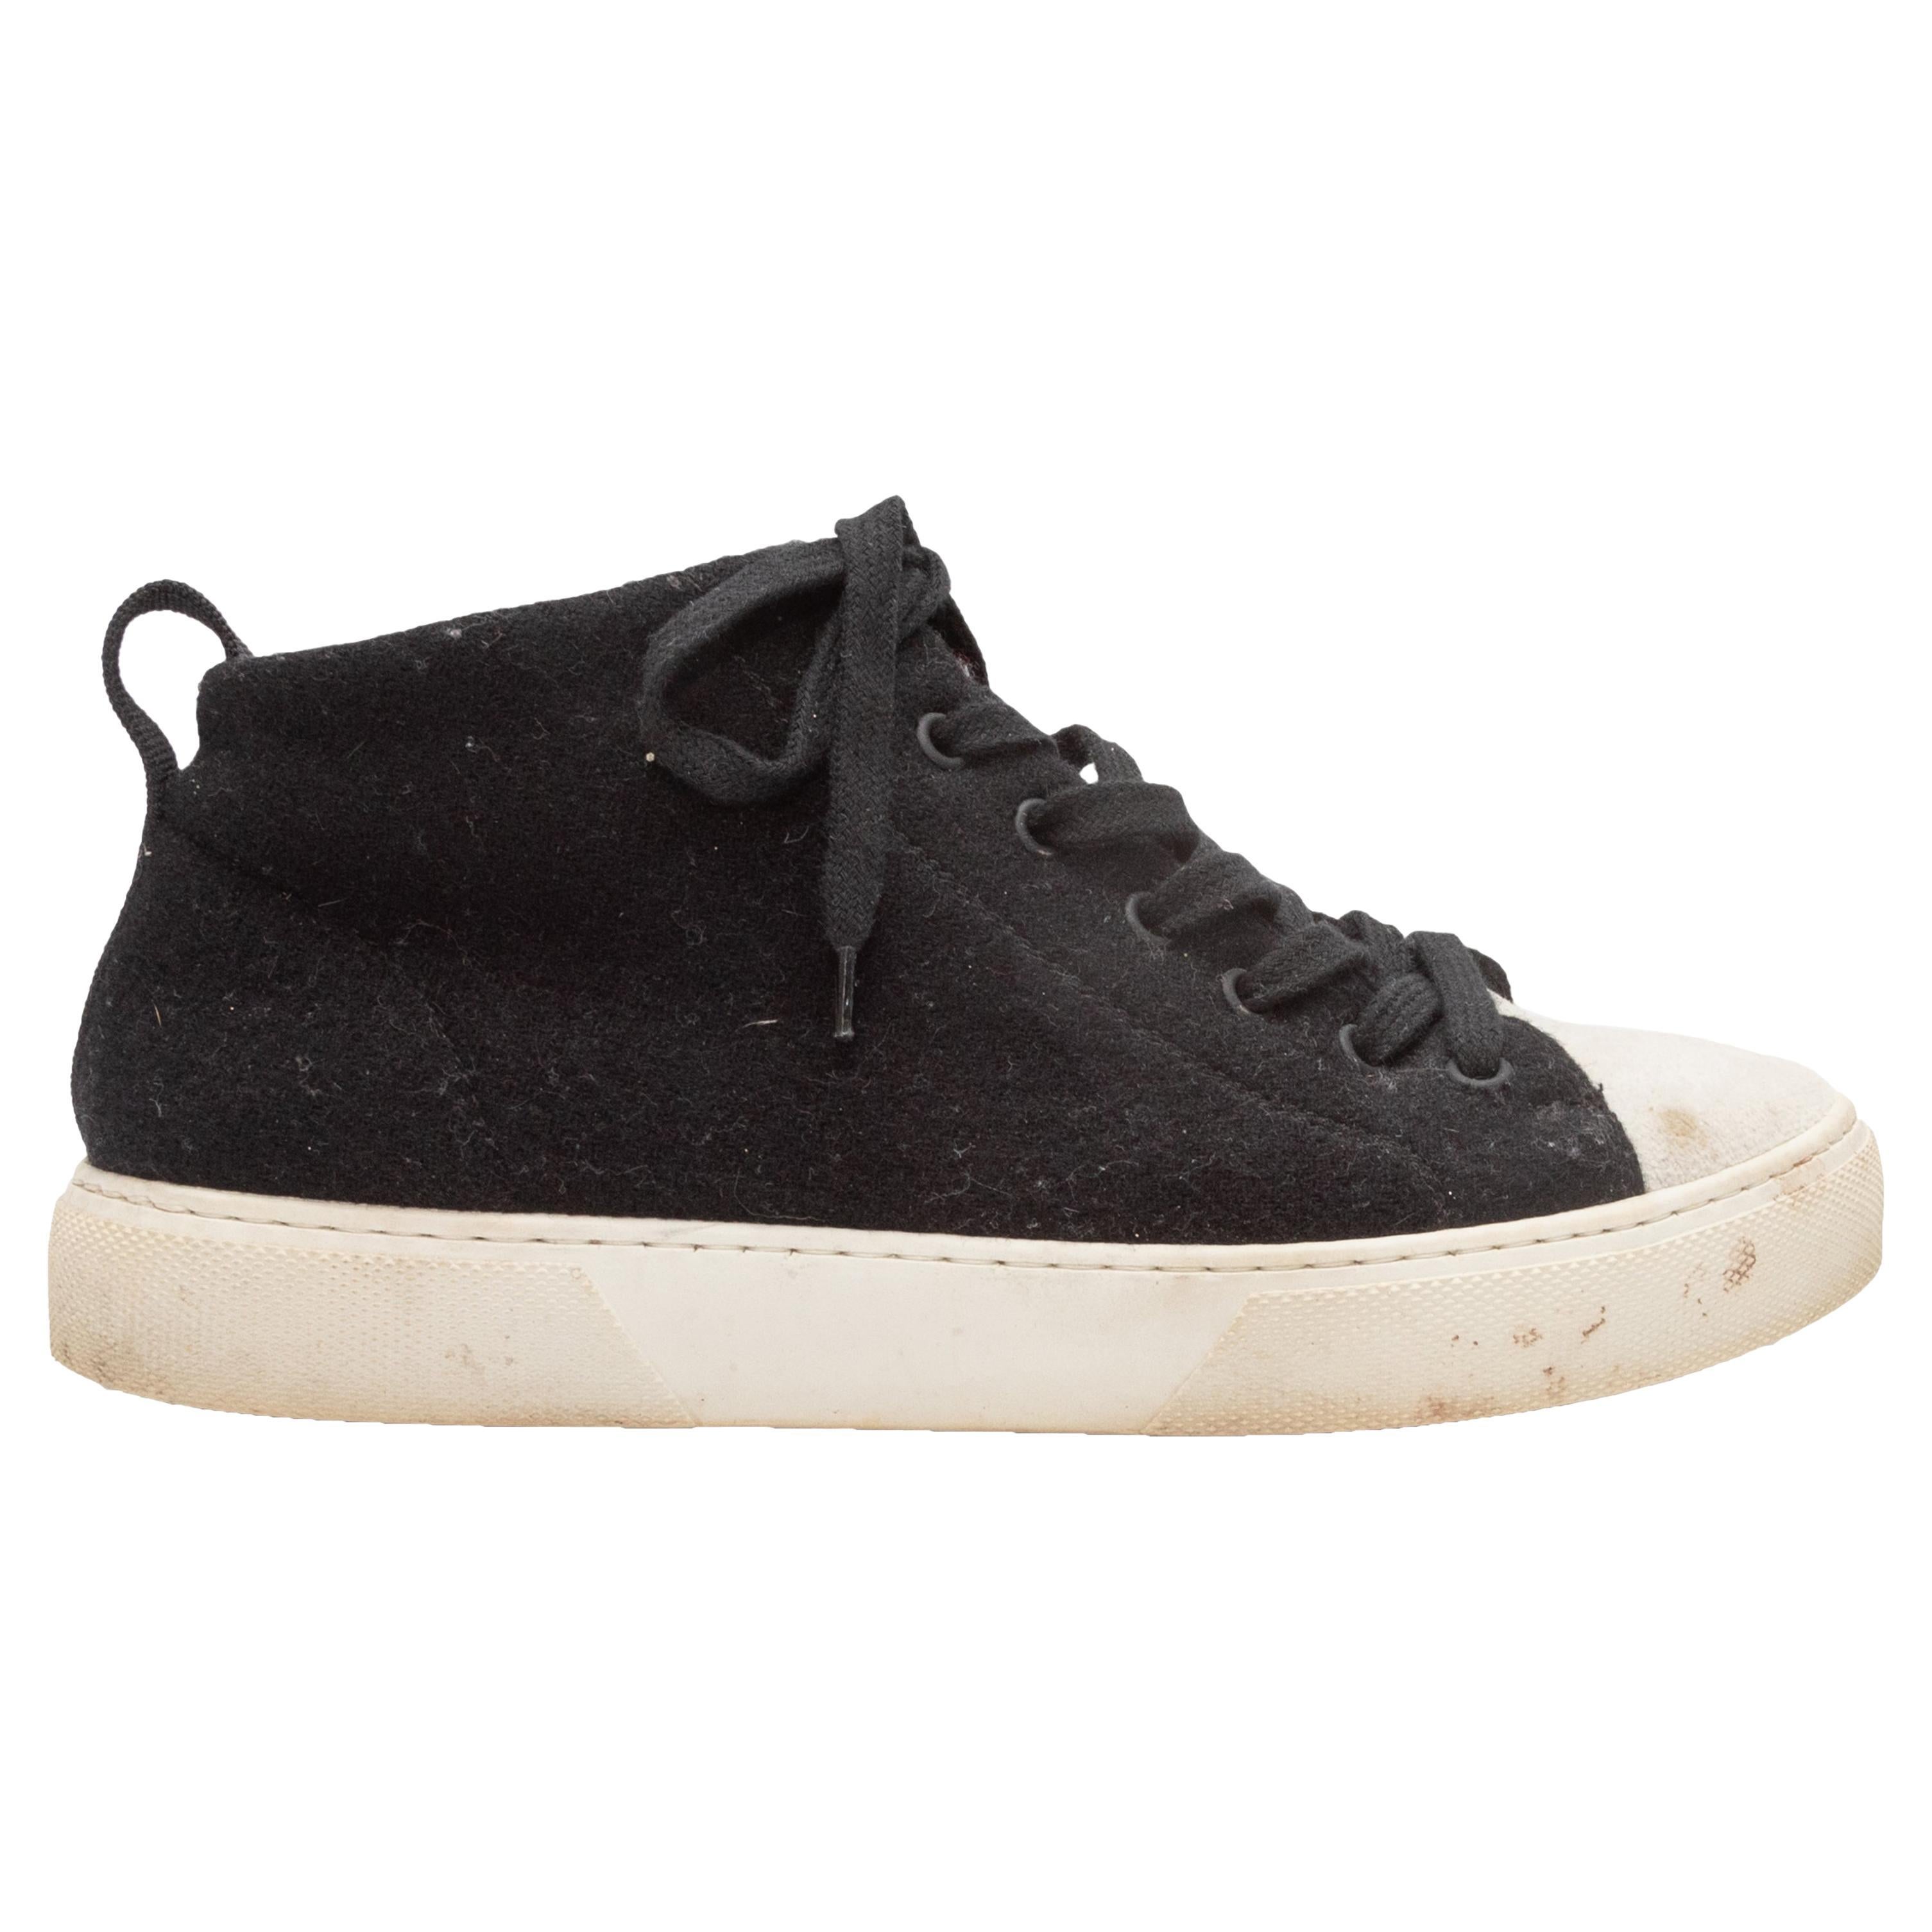 Black & White James Perse Wool High-Top Sneakers For Sale